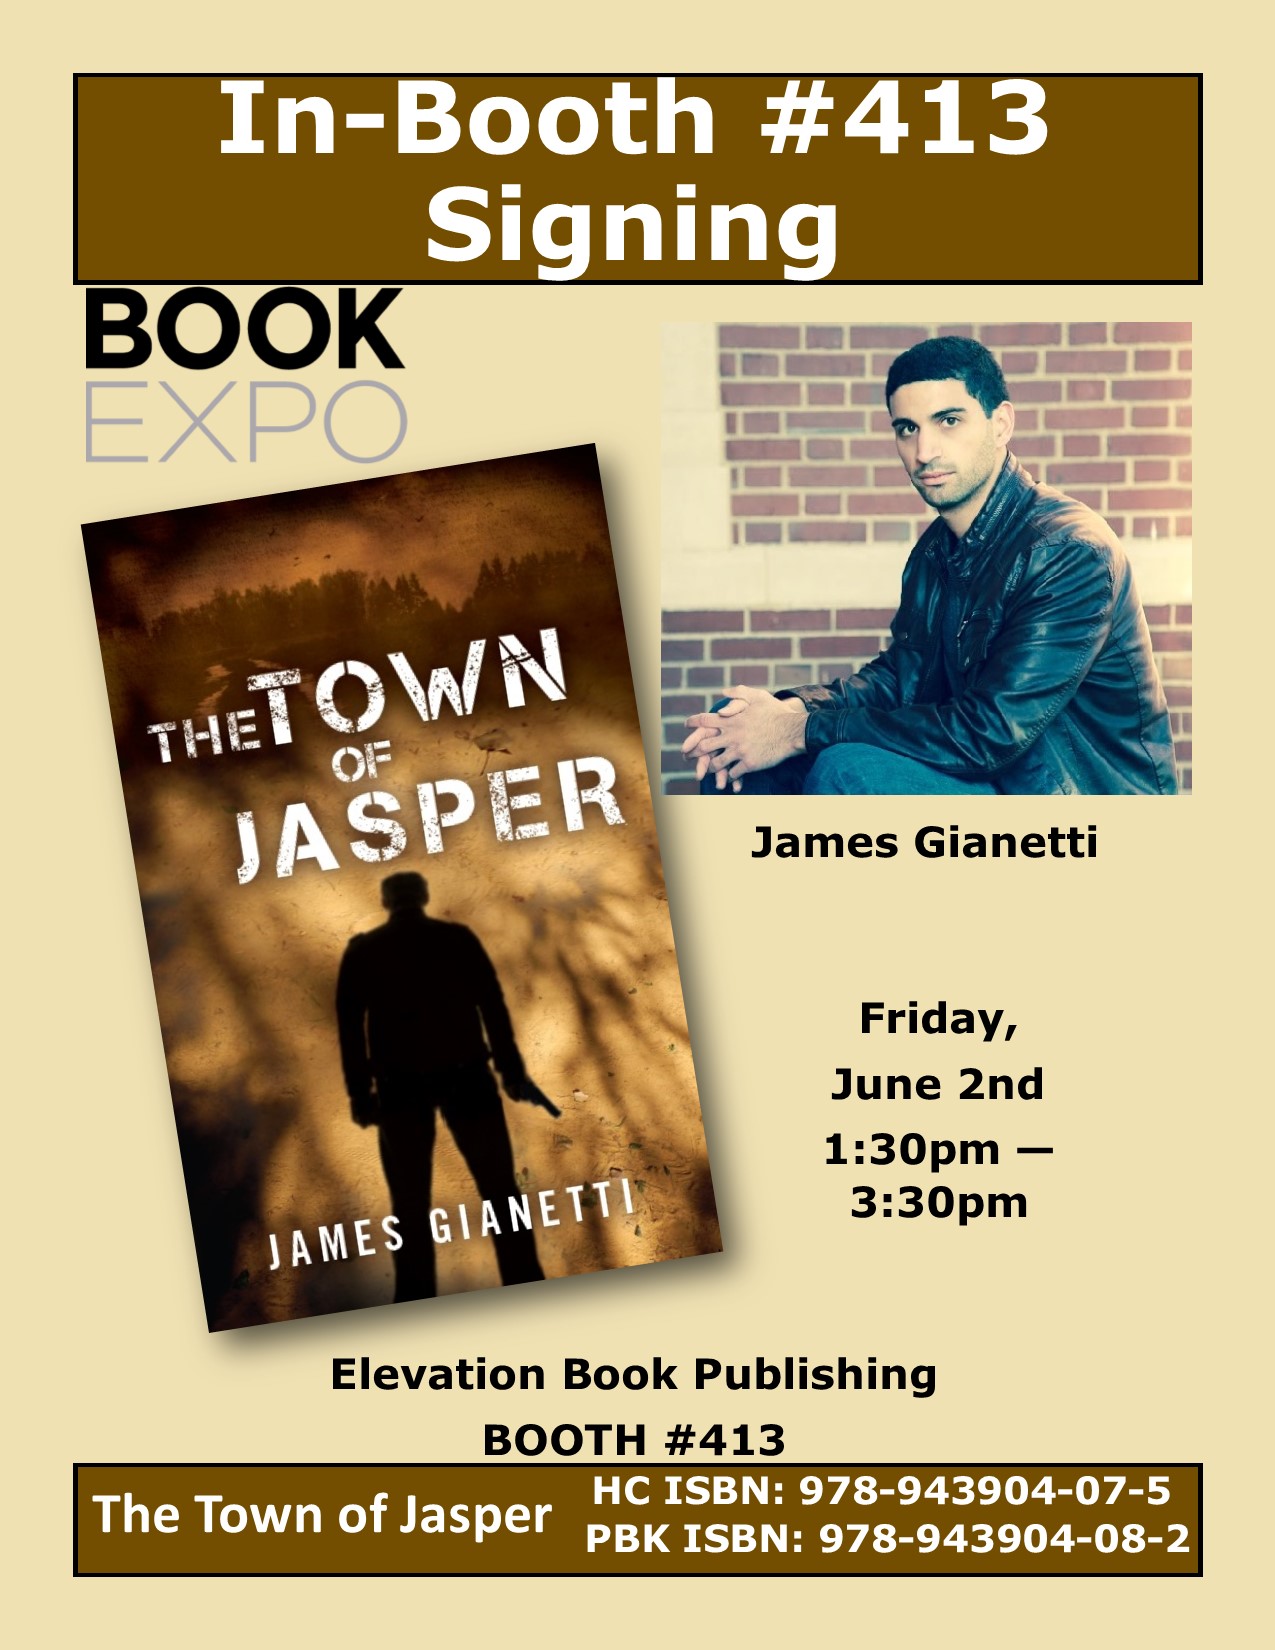 The Town of Jasper Expo Book Signing